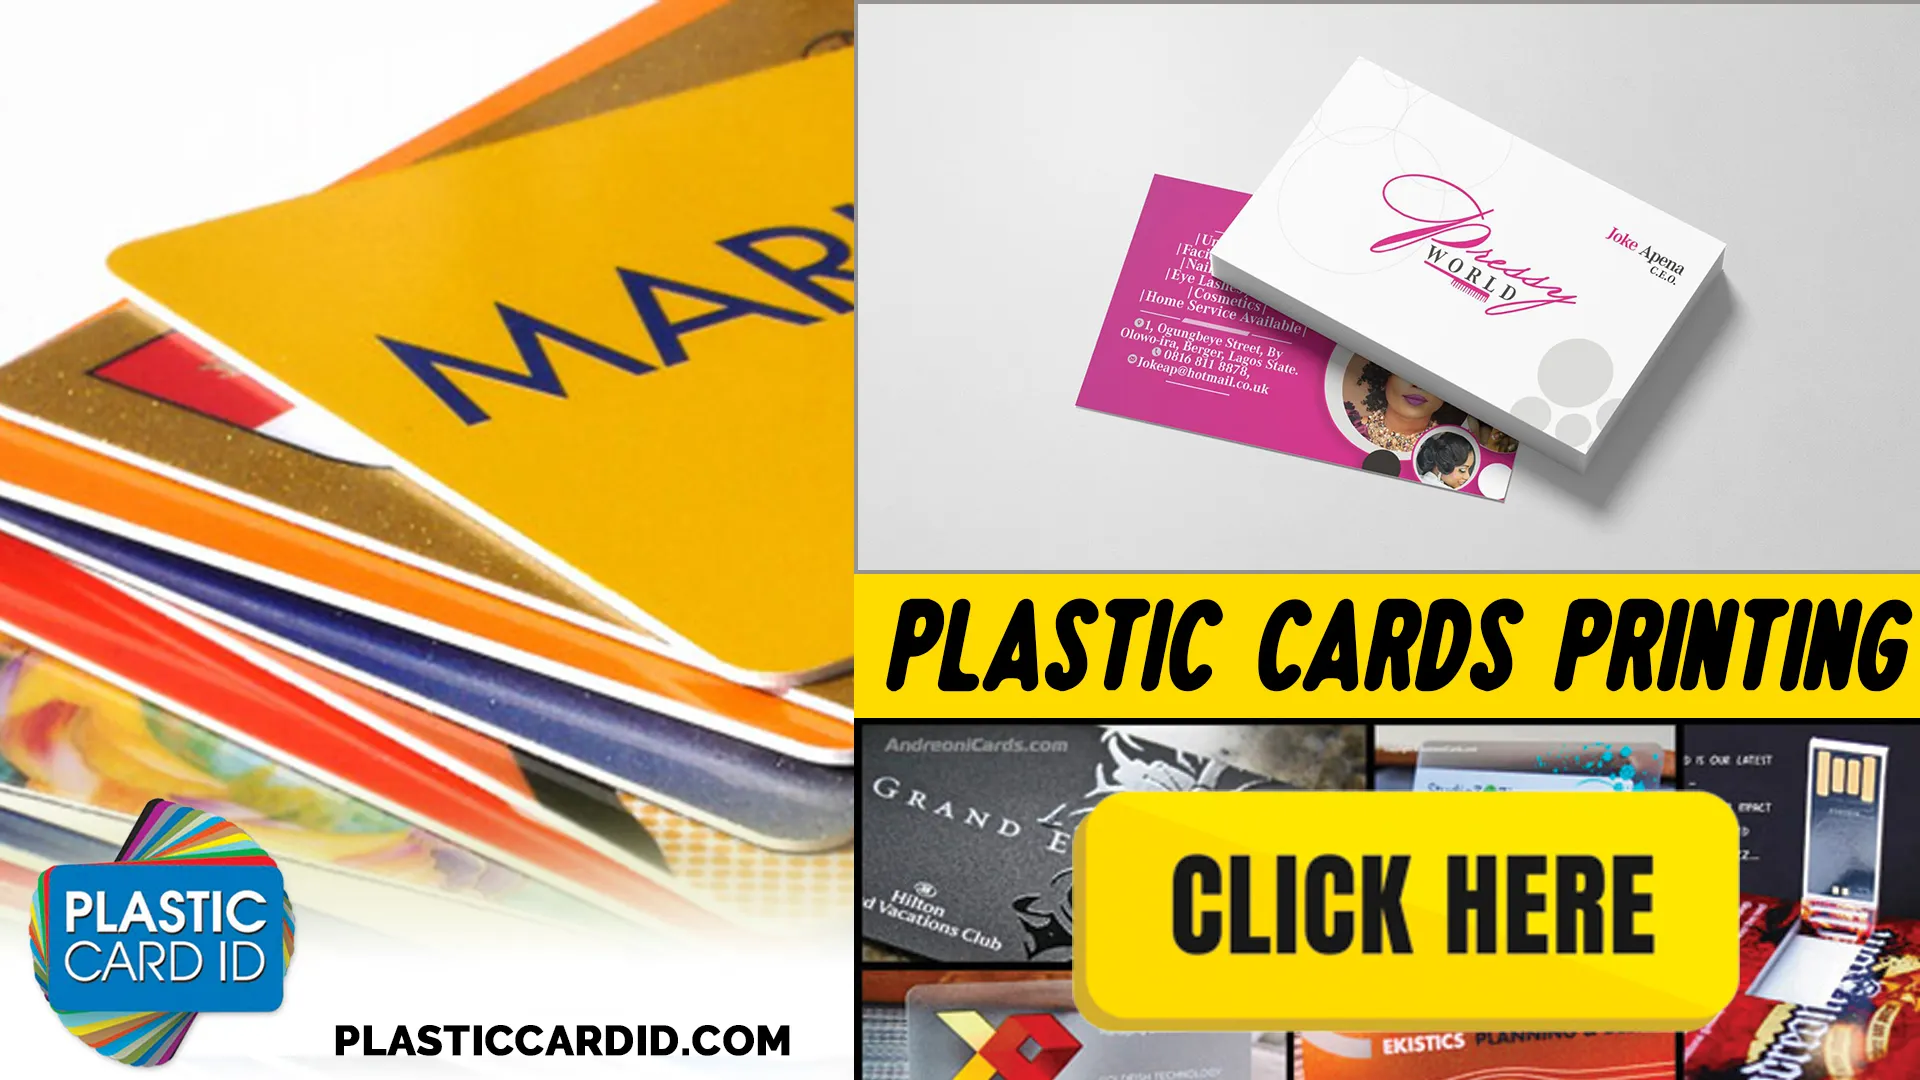 Seamless Integration with Plastic Card ID




